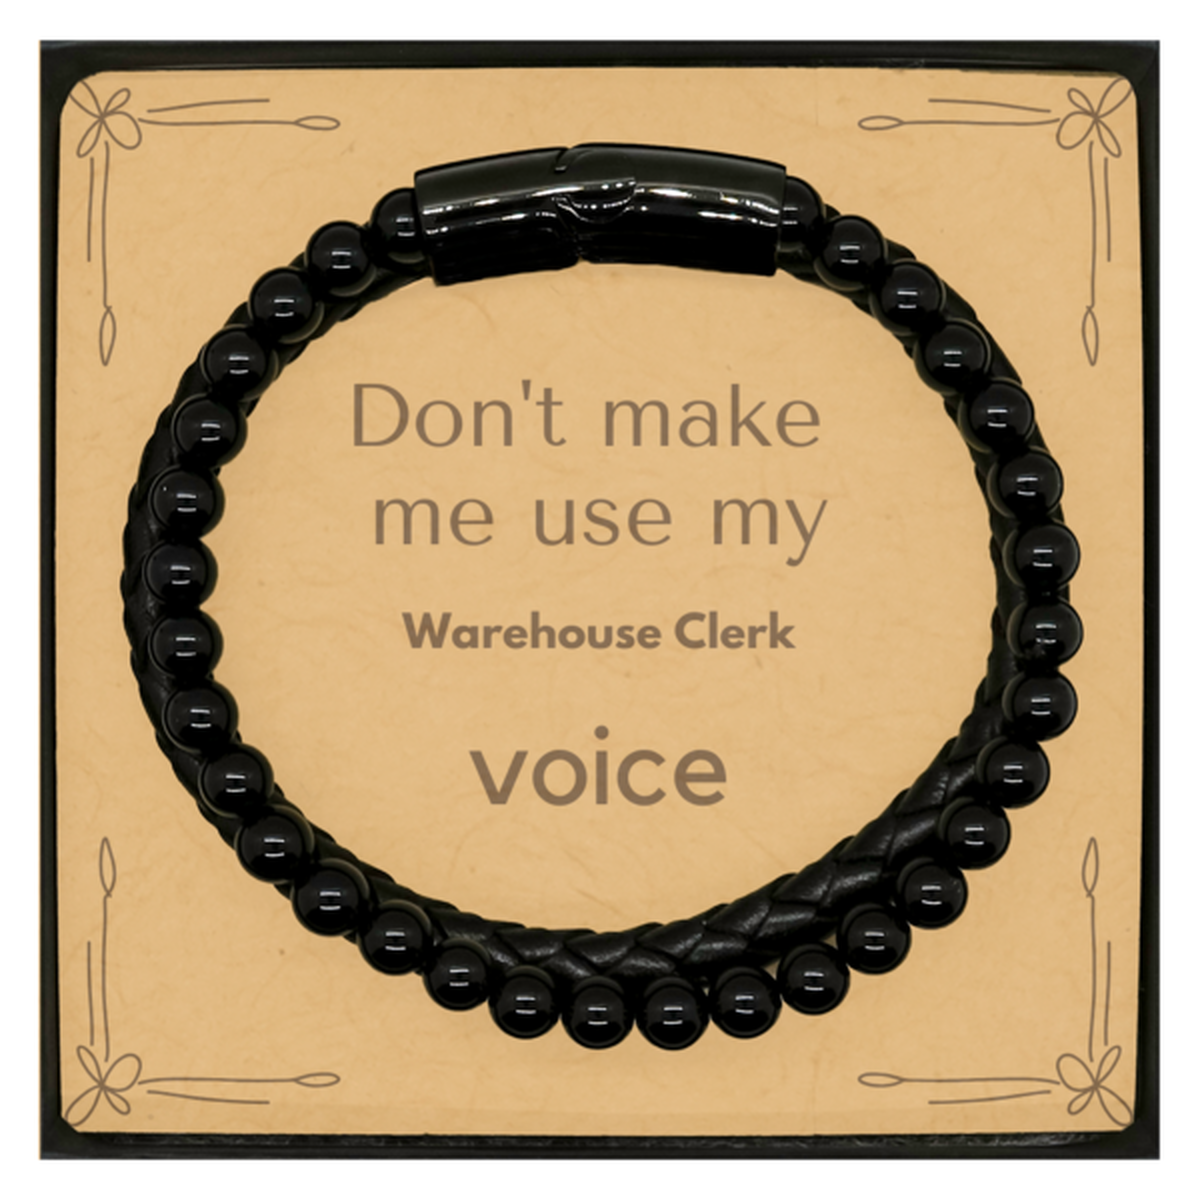 Don't make me use my Warehouse Clerk voice, Sarcasm Warehouse Clerk Card Gifts, Christmas Warehouse Clerk Stone Leather Bracelets Birthday Unique Gifts For Warehouse Clerk Coworkers, Men, Women, Colleague, Friends